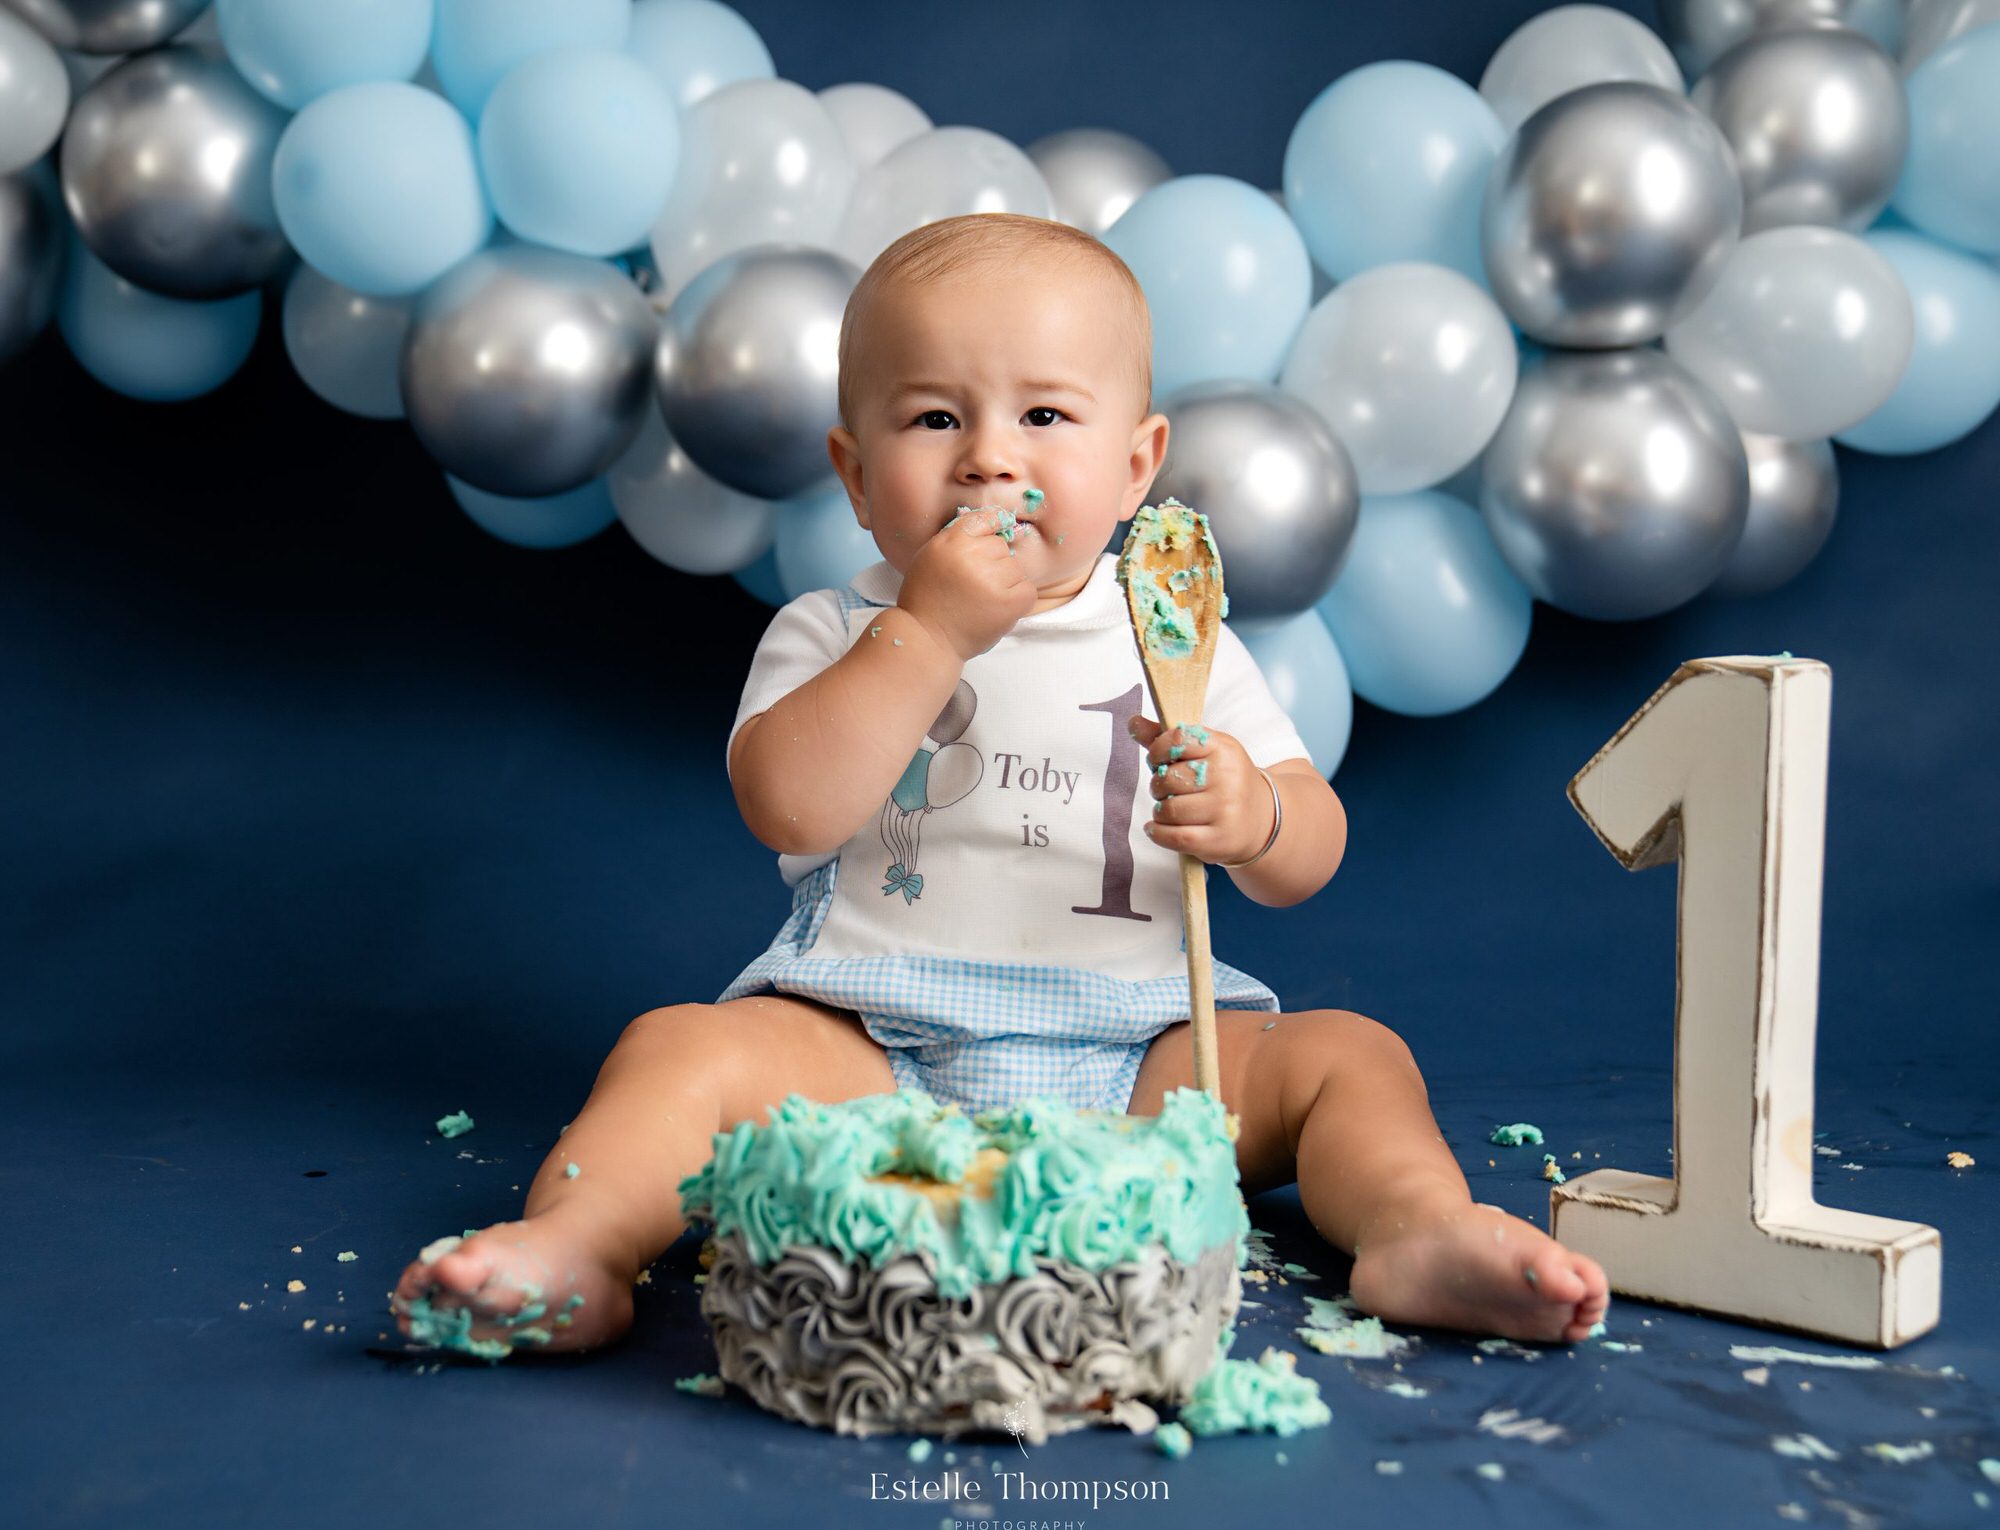 A baby boy sits in front of a cake he is eating at a sevenoaks cake smash photoshoot